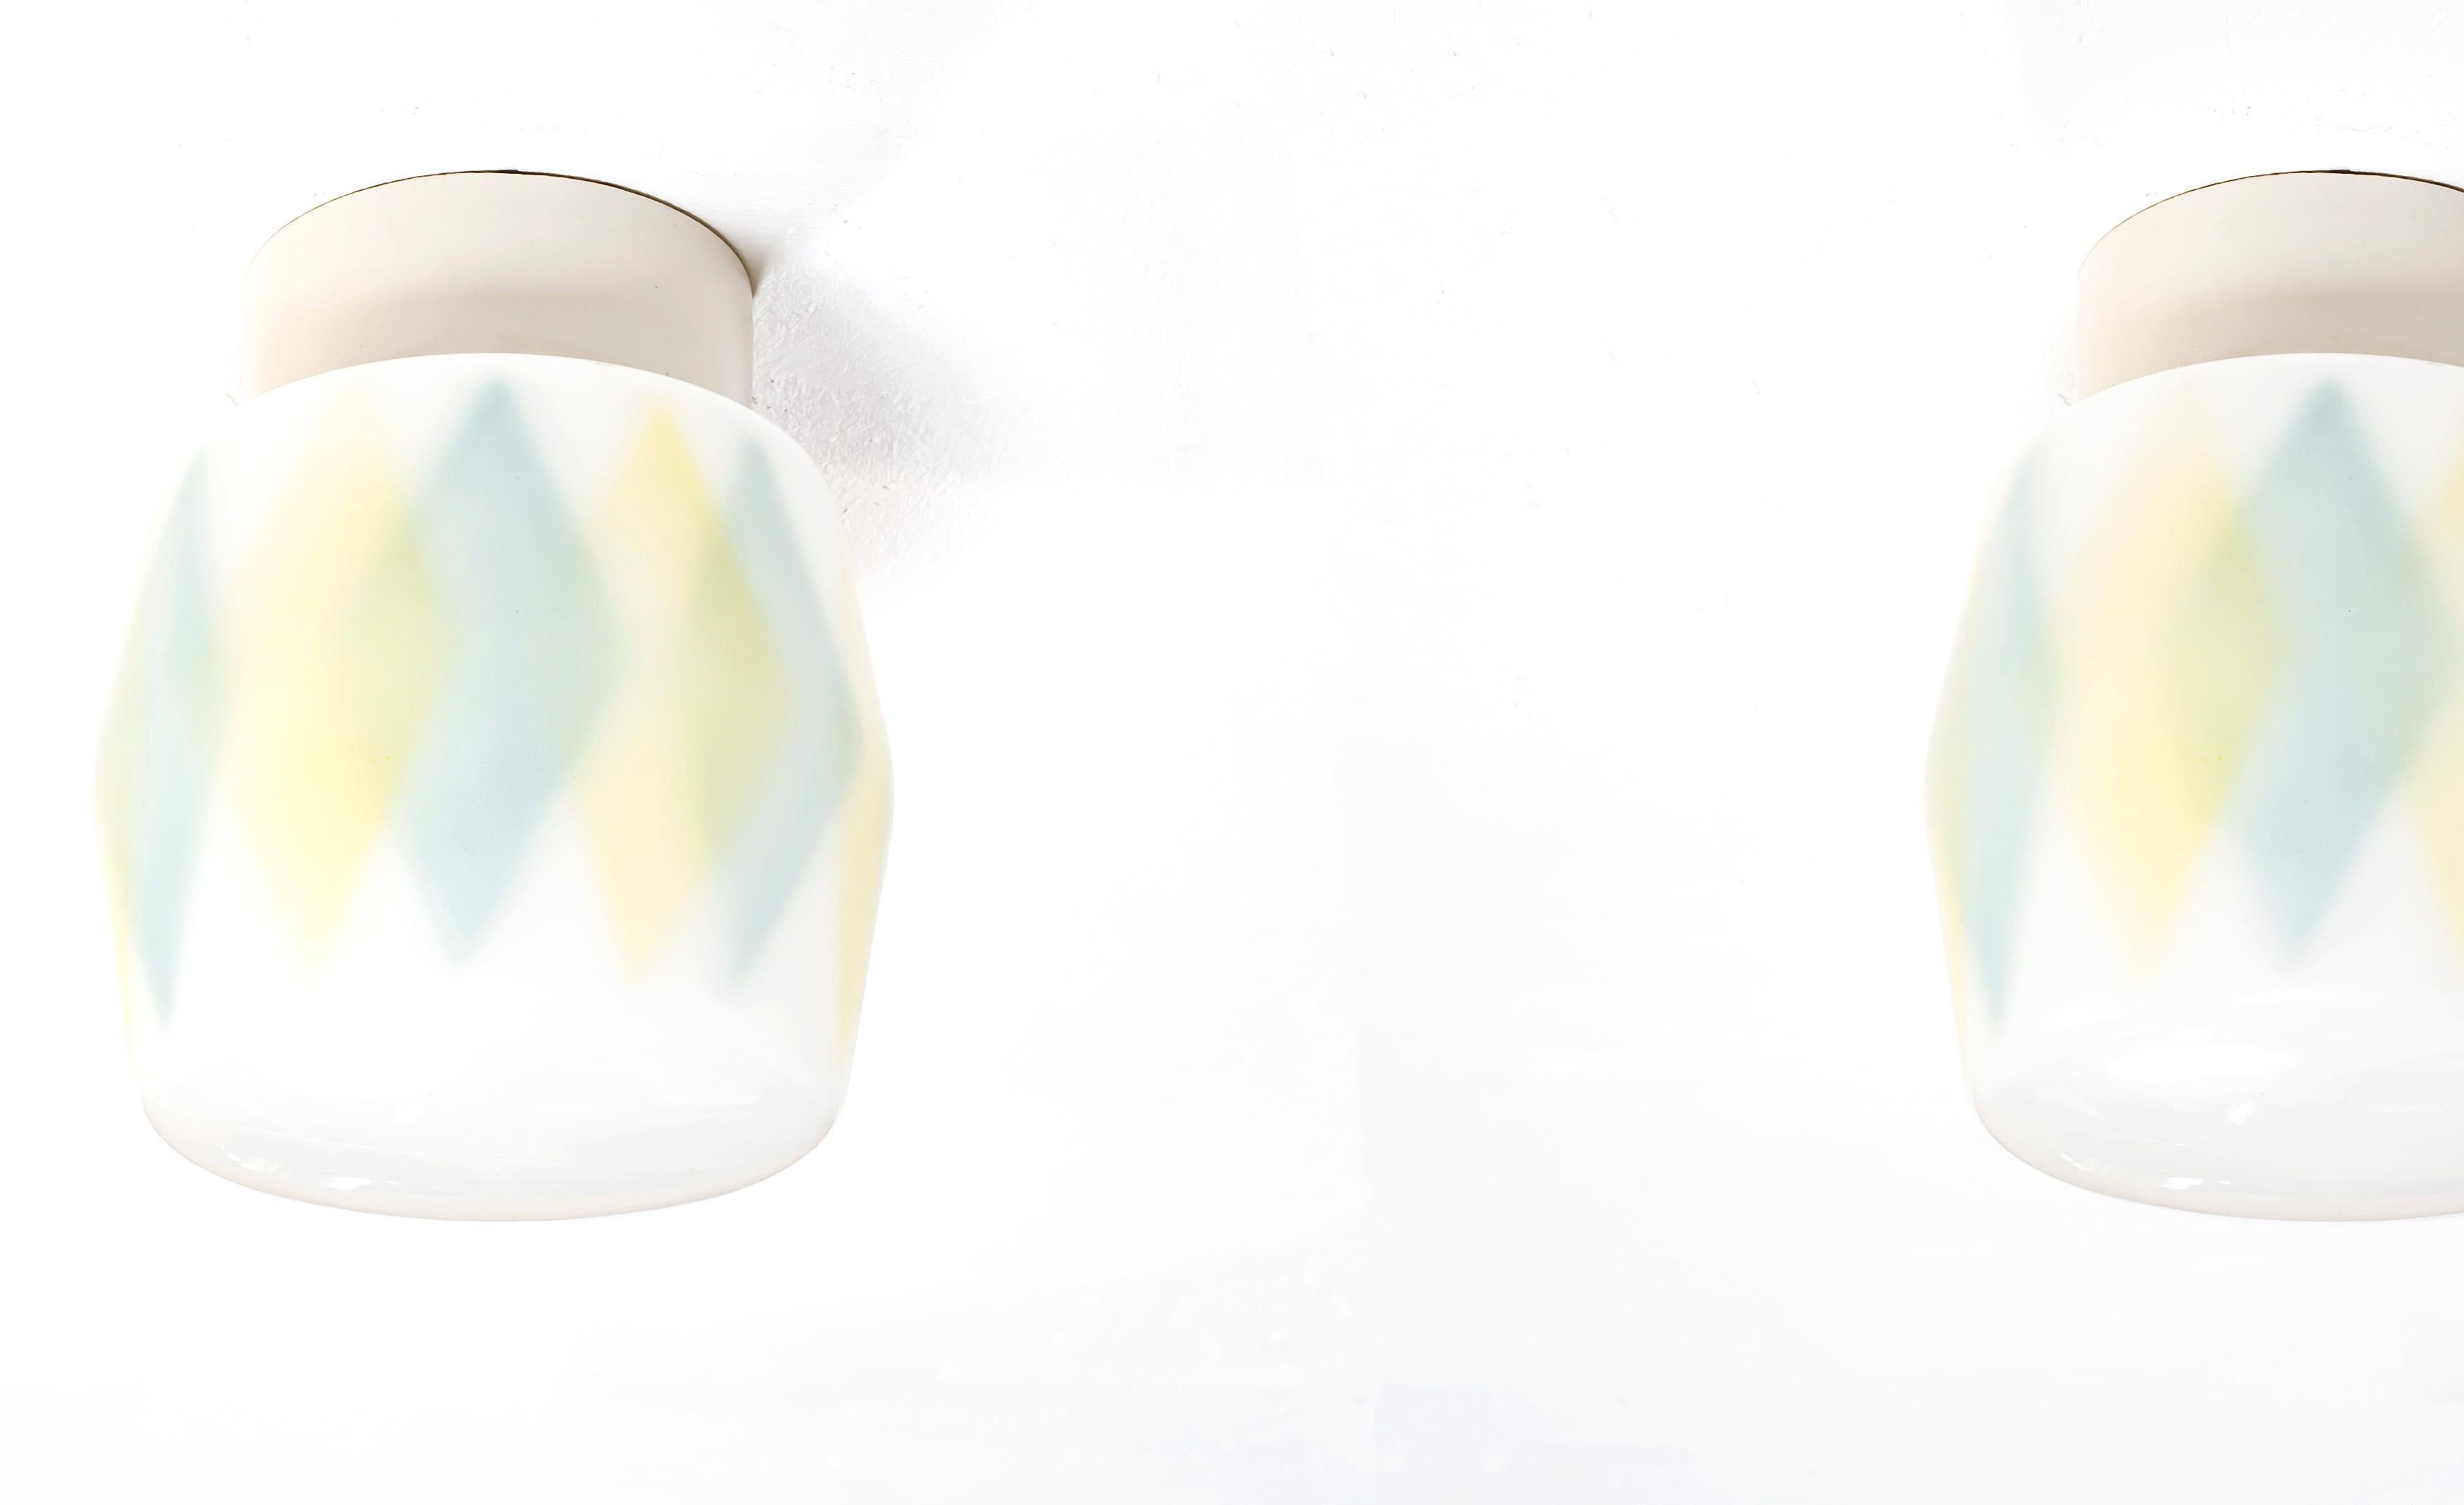 Wonderful pair of ceiling lights on a porcelain base with shades in decorated glass. Most likely designed and made in Norway from circa 1950s first half. Both lamps are fully working and in good vintage condition.